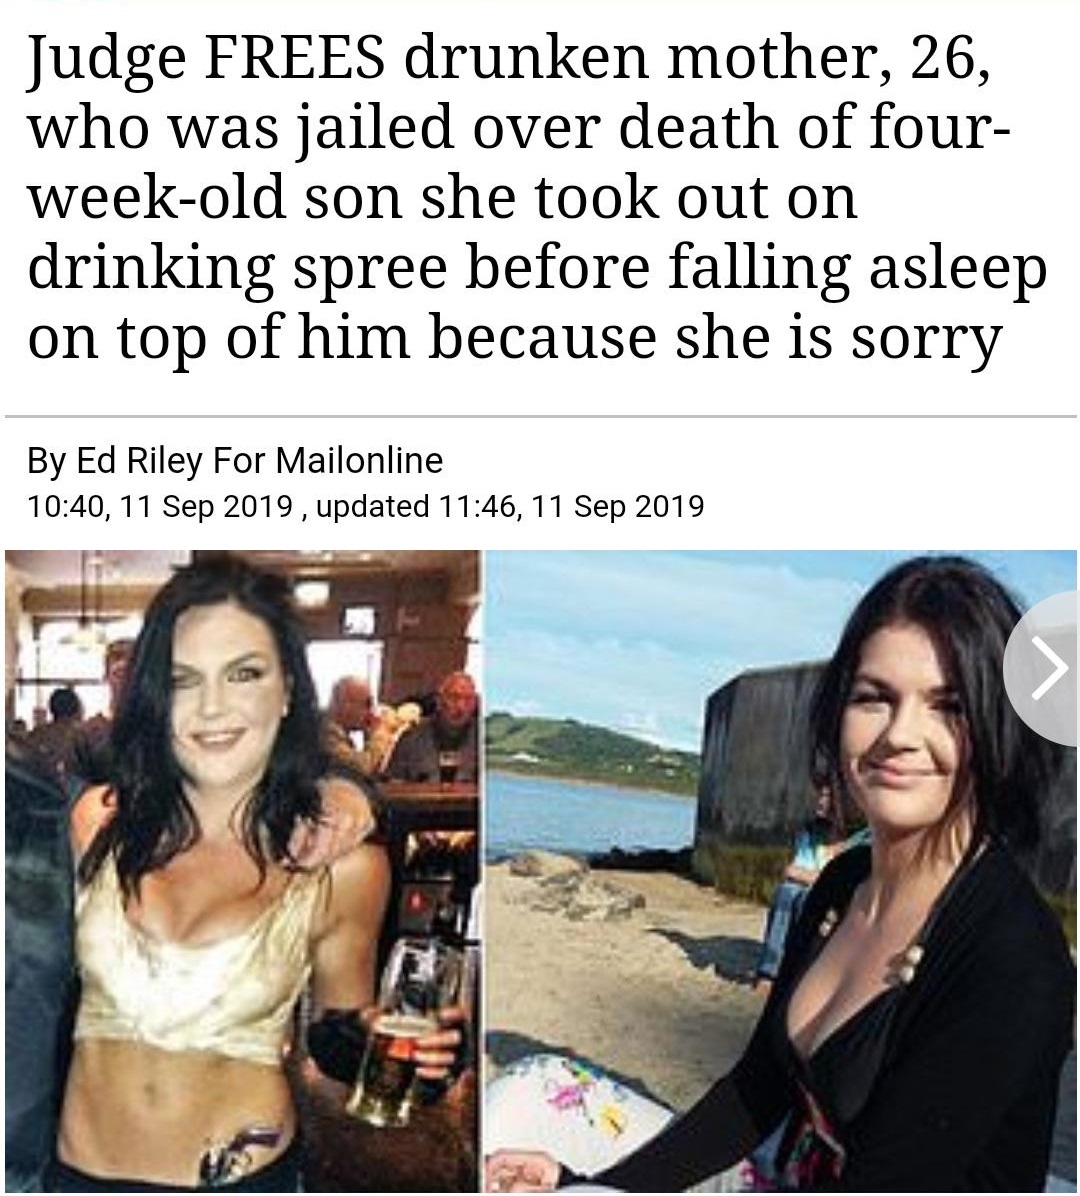 girl - Judge Frees drunken mother, 26, who was jailed over death of four weekold son she took out on drinking spree before falling asleep on top of him because she is sorry By Ed Riley For Mailonline , , updated ,